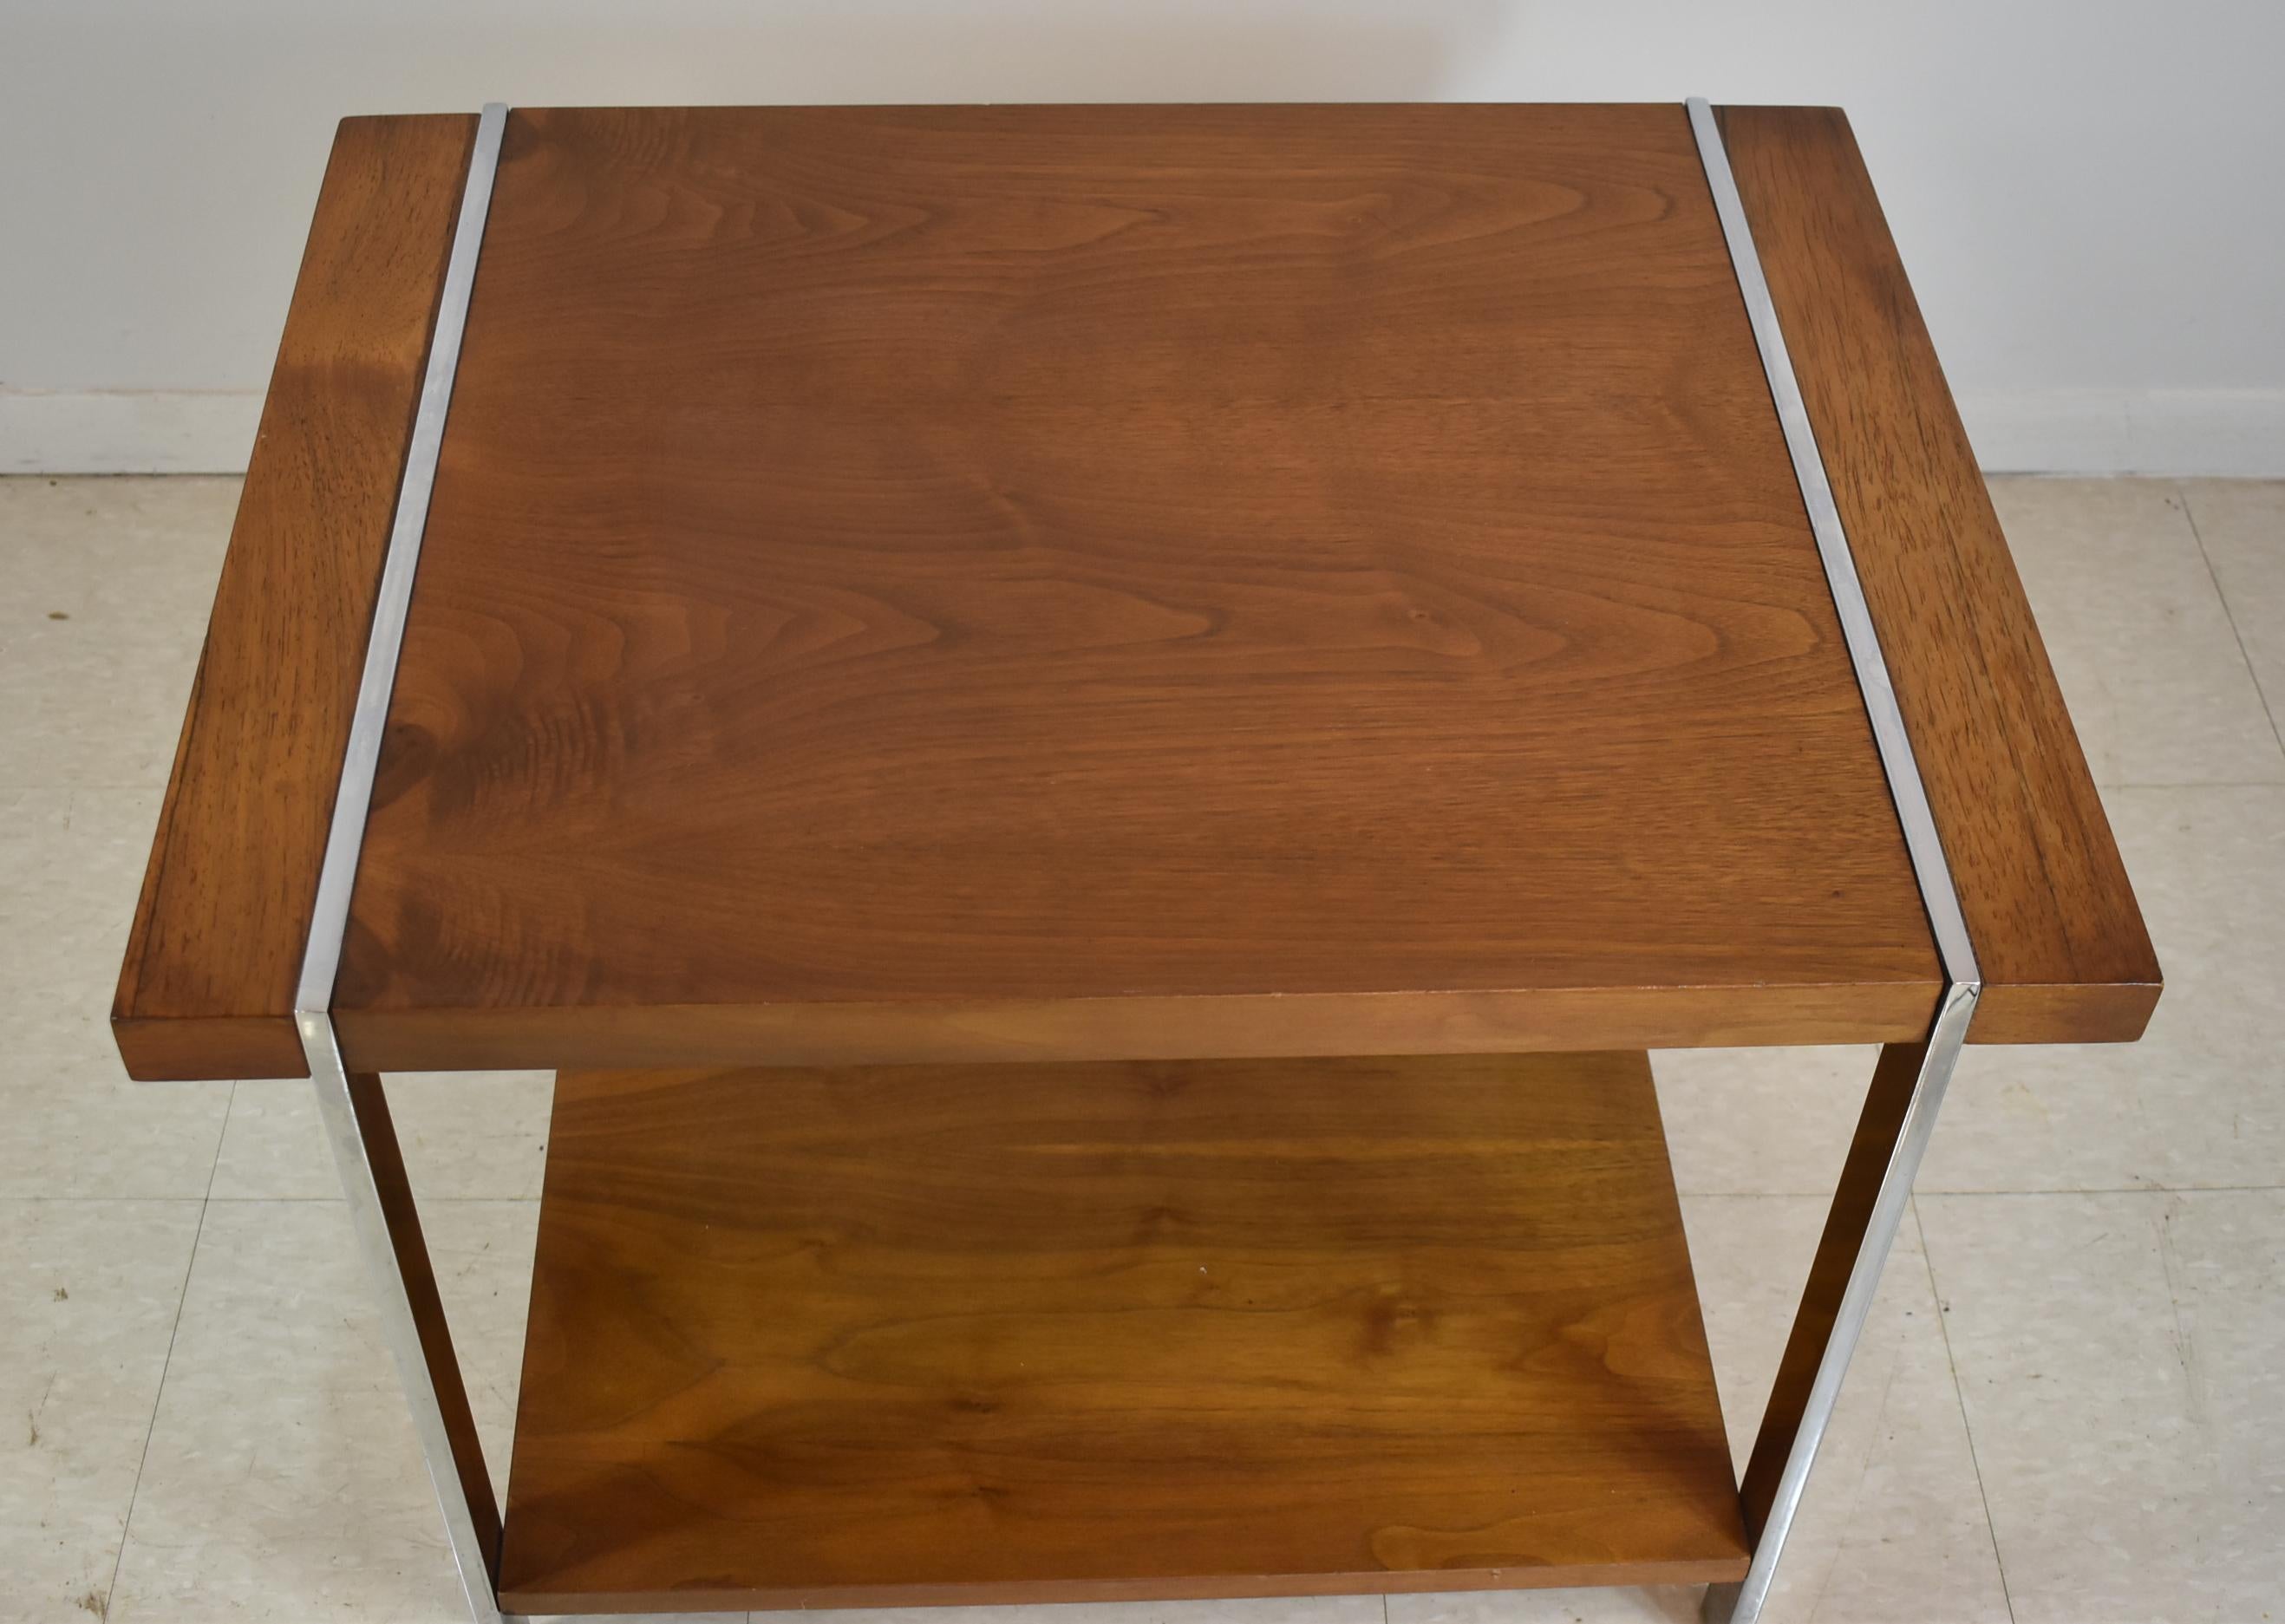 Mid-Century Modern walnut and chrome side table by Lane Furniture. Very nice condition. A few very minor edge dents. Dimensions: 21.75